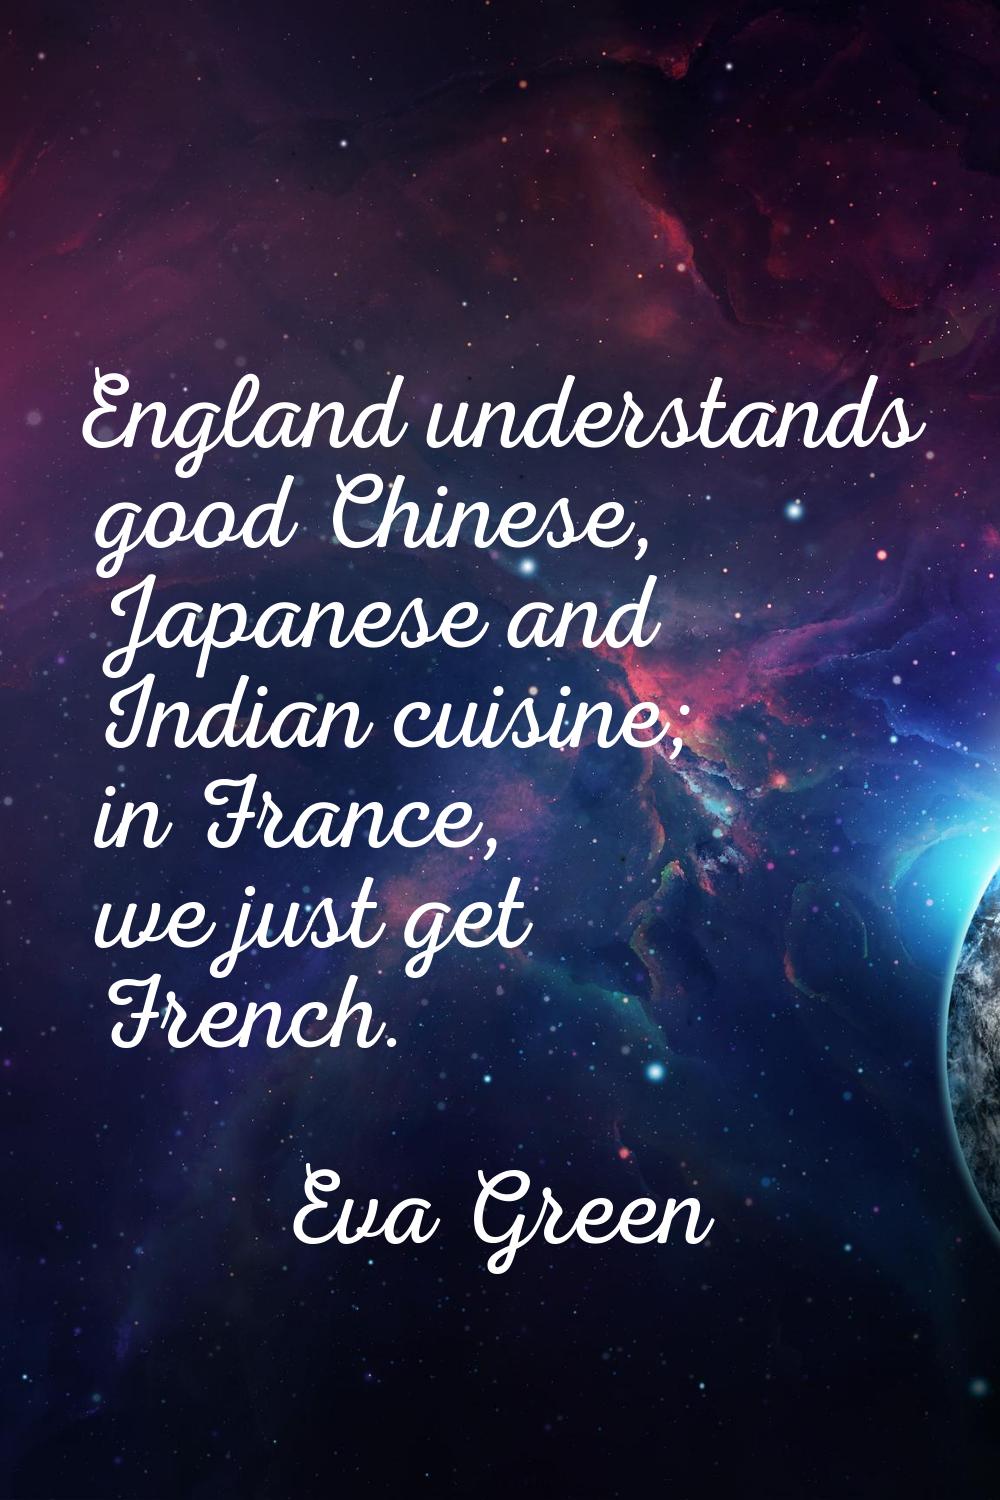 England understands good Chinese, Japanese and Indian cuisine; in France, we just get French.